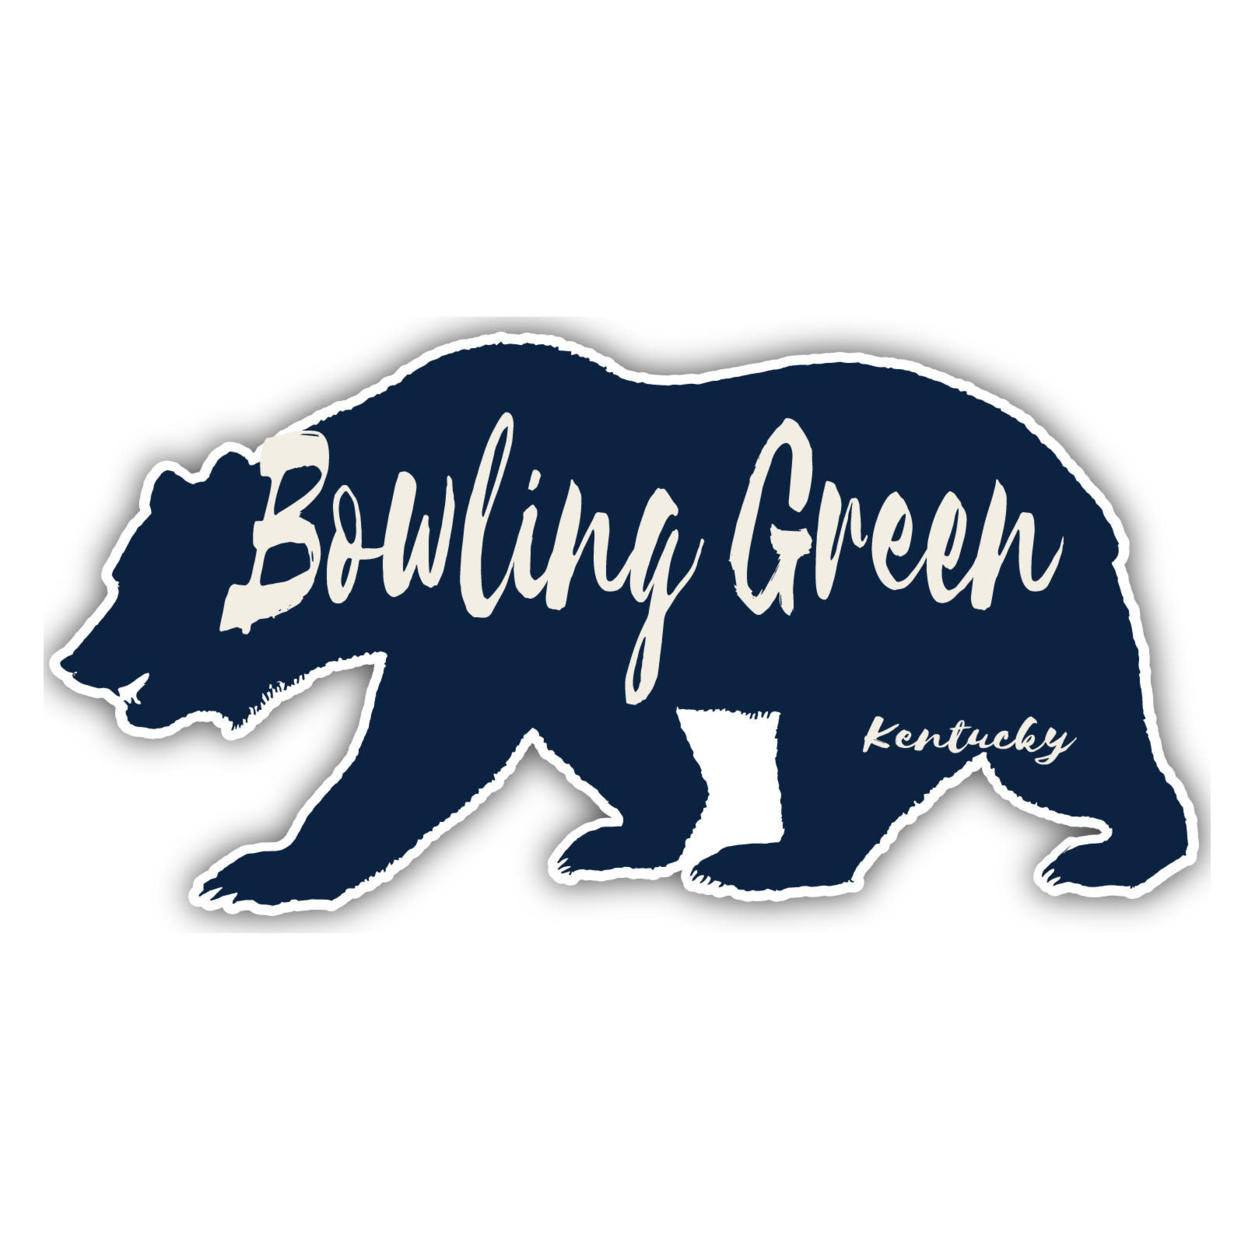 Bowling Green Kentucky Souvenir Decorative Stickers (Choose Theme And Size) - Single Unit, 8-Inch, Tent